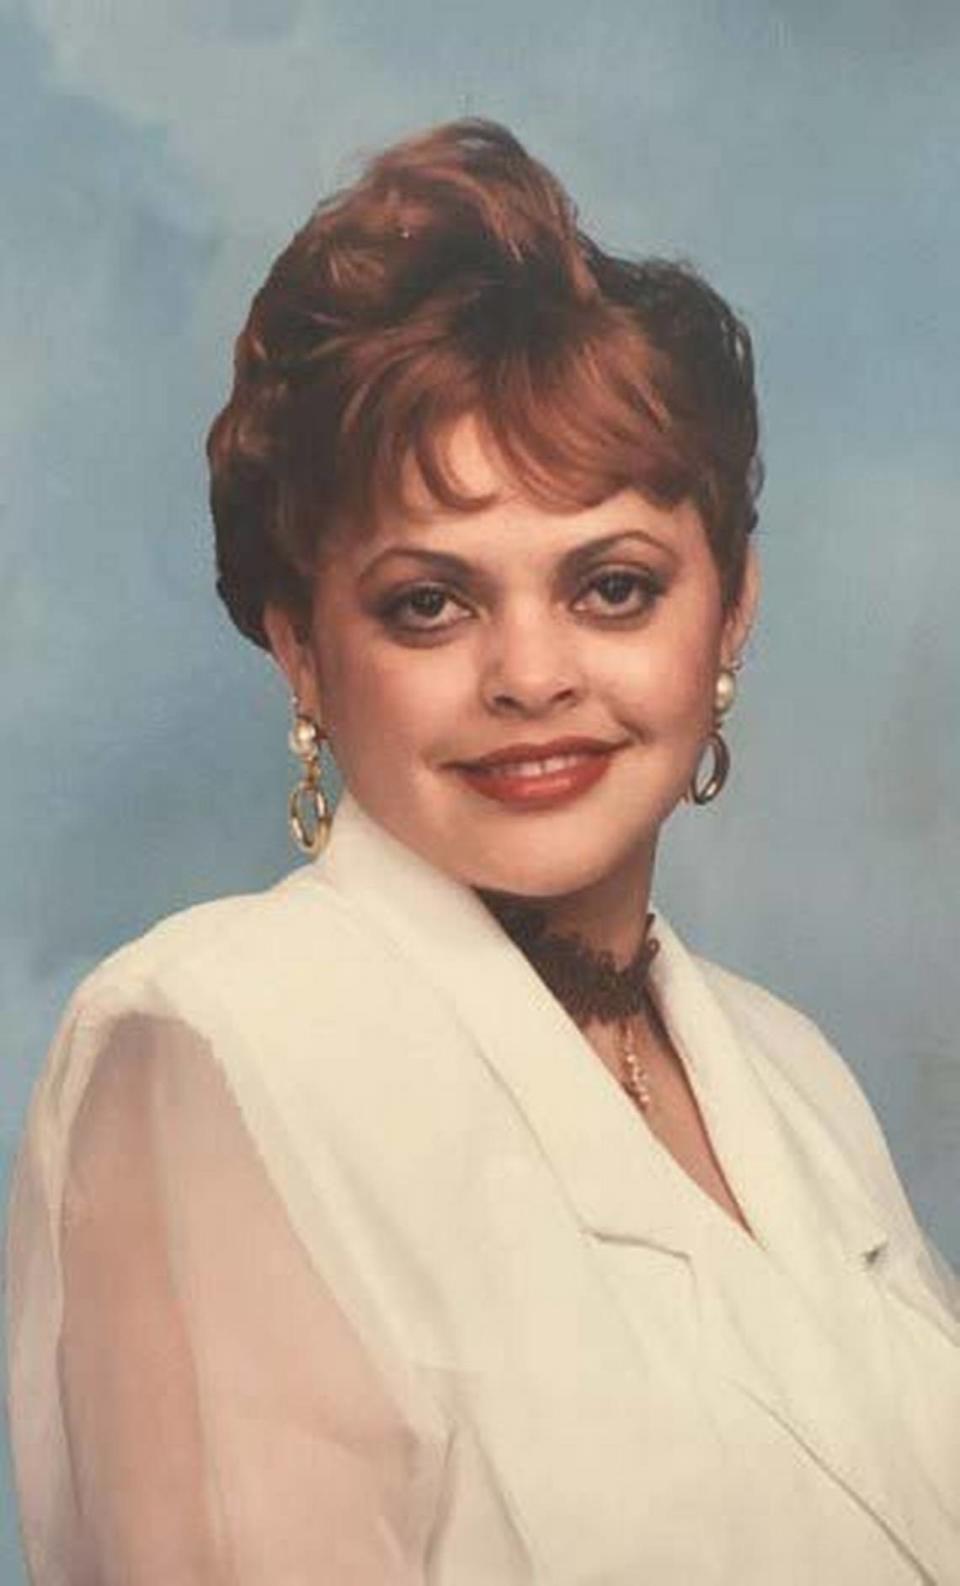 Maria Telles-Gonzalez of Kissimmee, Florida, had been known as the Beaufort County “Jane Doe” for 27 years. Gonzalez, who was 36 at the time of her death, was a wife and mother of three children.